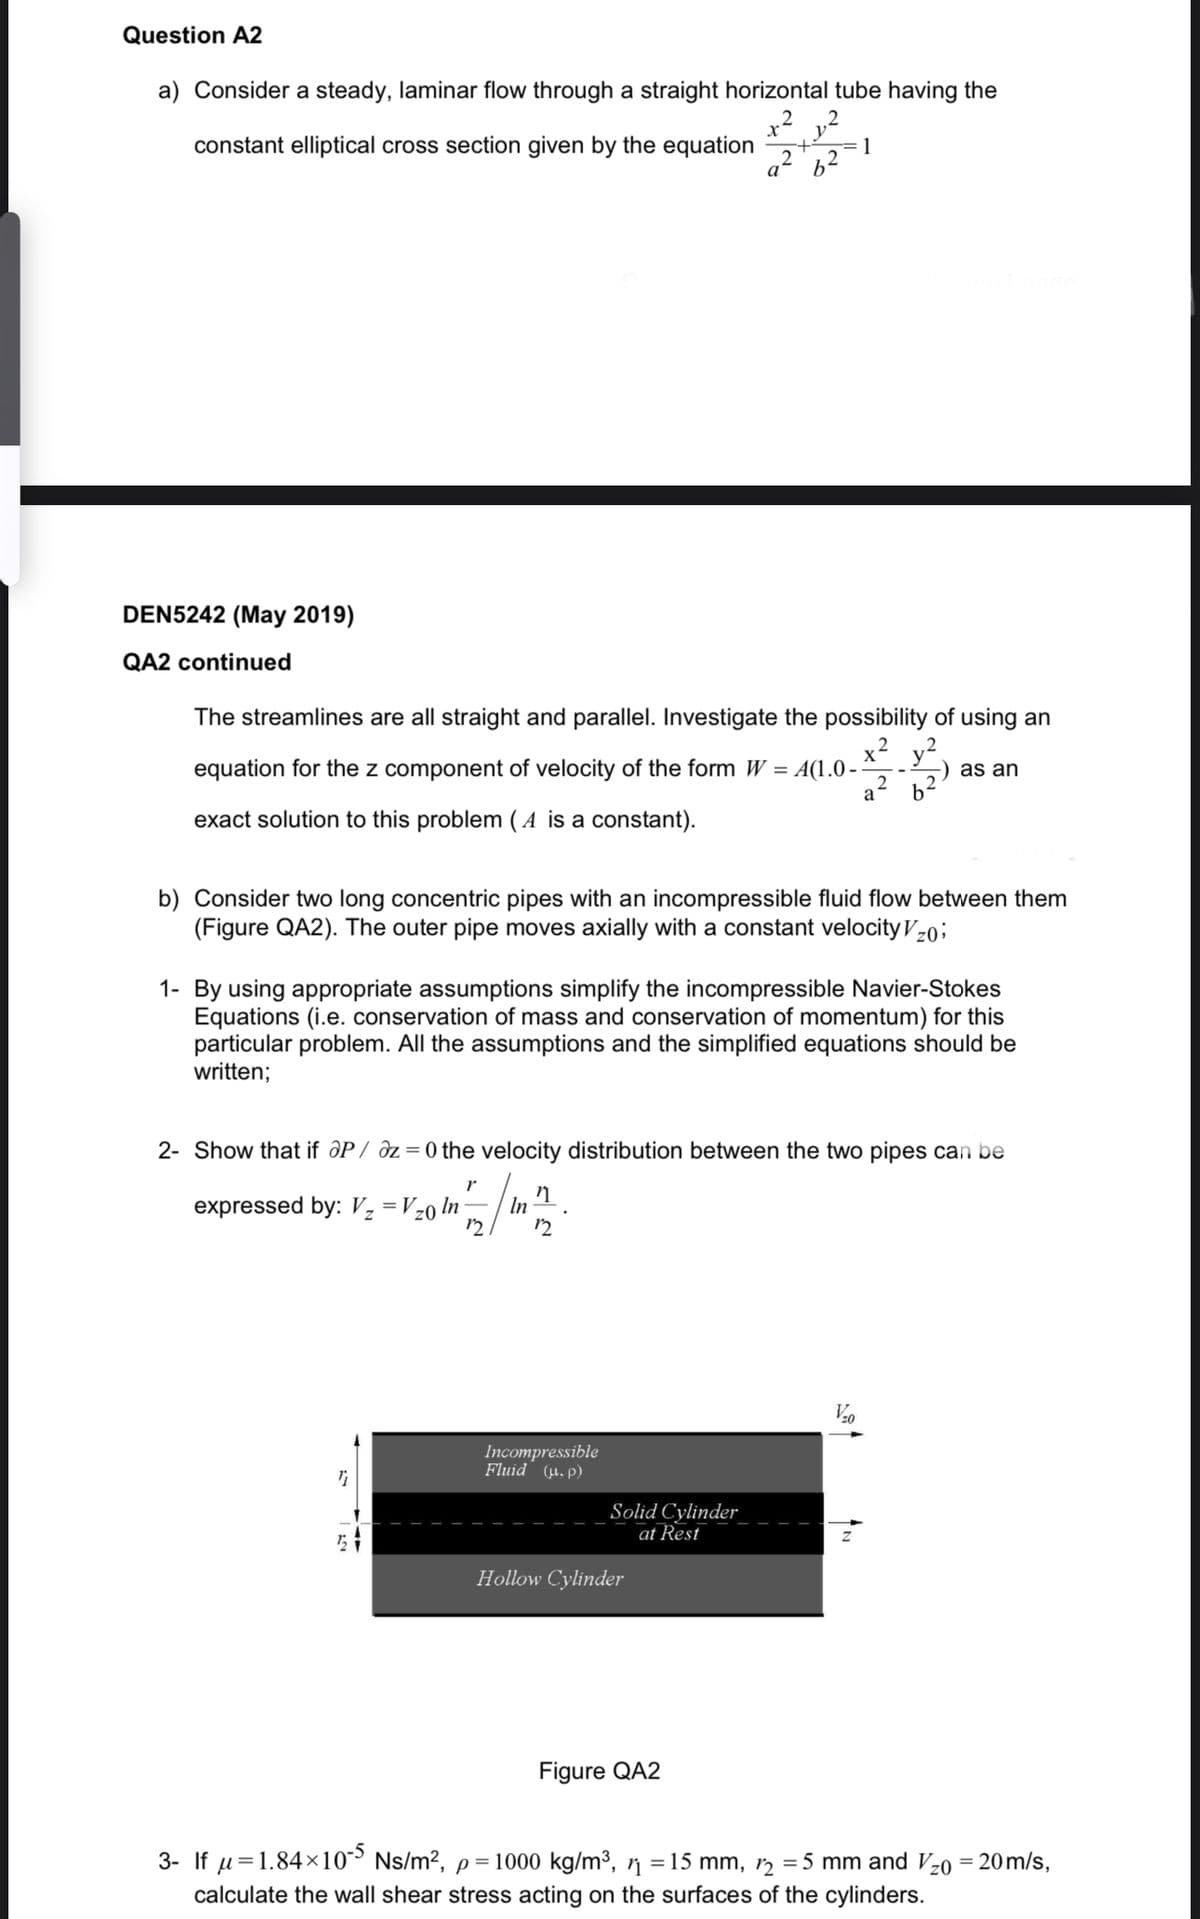 Question A2
a) Consider a steady, laminar flow through a straight horizontal tube having the
constant elliptical cross section given by the equation
2
DEN5242 (May 2019)
QA2 continued
The streamlines are all straight and parallel. Investigate the possibility of using an
equation for the z component of velocity of the form W = A(1.0--
exact solution to this problem (A is a constant).
expressed by: V₂ = V₂0 In
v.
X.
be
Incompressible
Fluid (.p)
a²
b) Consider two long concentric pipes with an incompressible fluid flow between them
(Figure QA2). The outer pipe moves axially with a constant velocity Vz0;
Solid Cylinder
at Rest
1- By using appropriate assumptions simplify the incompressible Navier-Stokes
Equations (i.e. conservation of mass and conservation of momentum) for this
particular problem. All the assumptions and the simplified equations should be
written;
Hollow Cylinder
1
2- Show that if aP / az=0 the velocity distribution between the two pipes can be
r
2017/12/1²/²
In
Figure QA2
2
as an
V/₂0
3- If μ=1.84×105 Ns/m², p= 1000 kg/m³, ½ = 15 mm, 1₂ = 5 mm and V₂0 = 20 m/s,
calculate the wall shear stress acting on the surfaces of the cylinders.